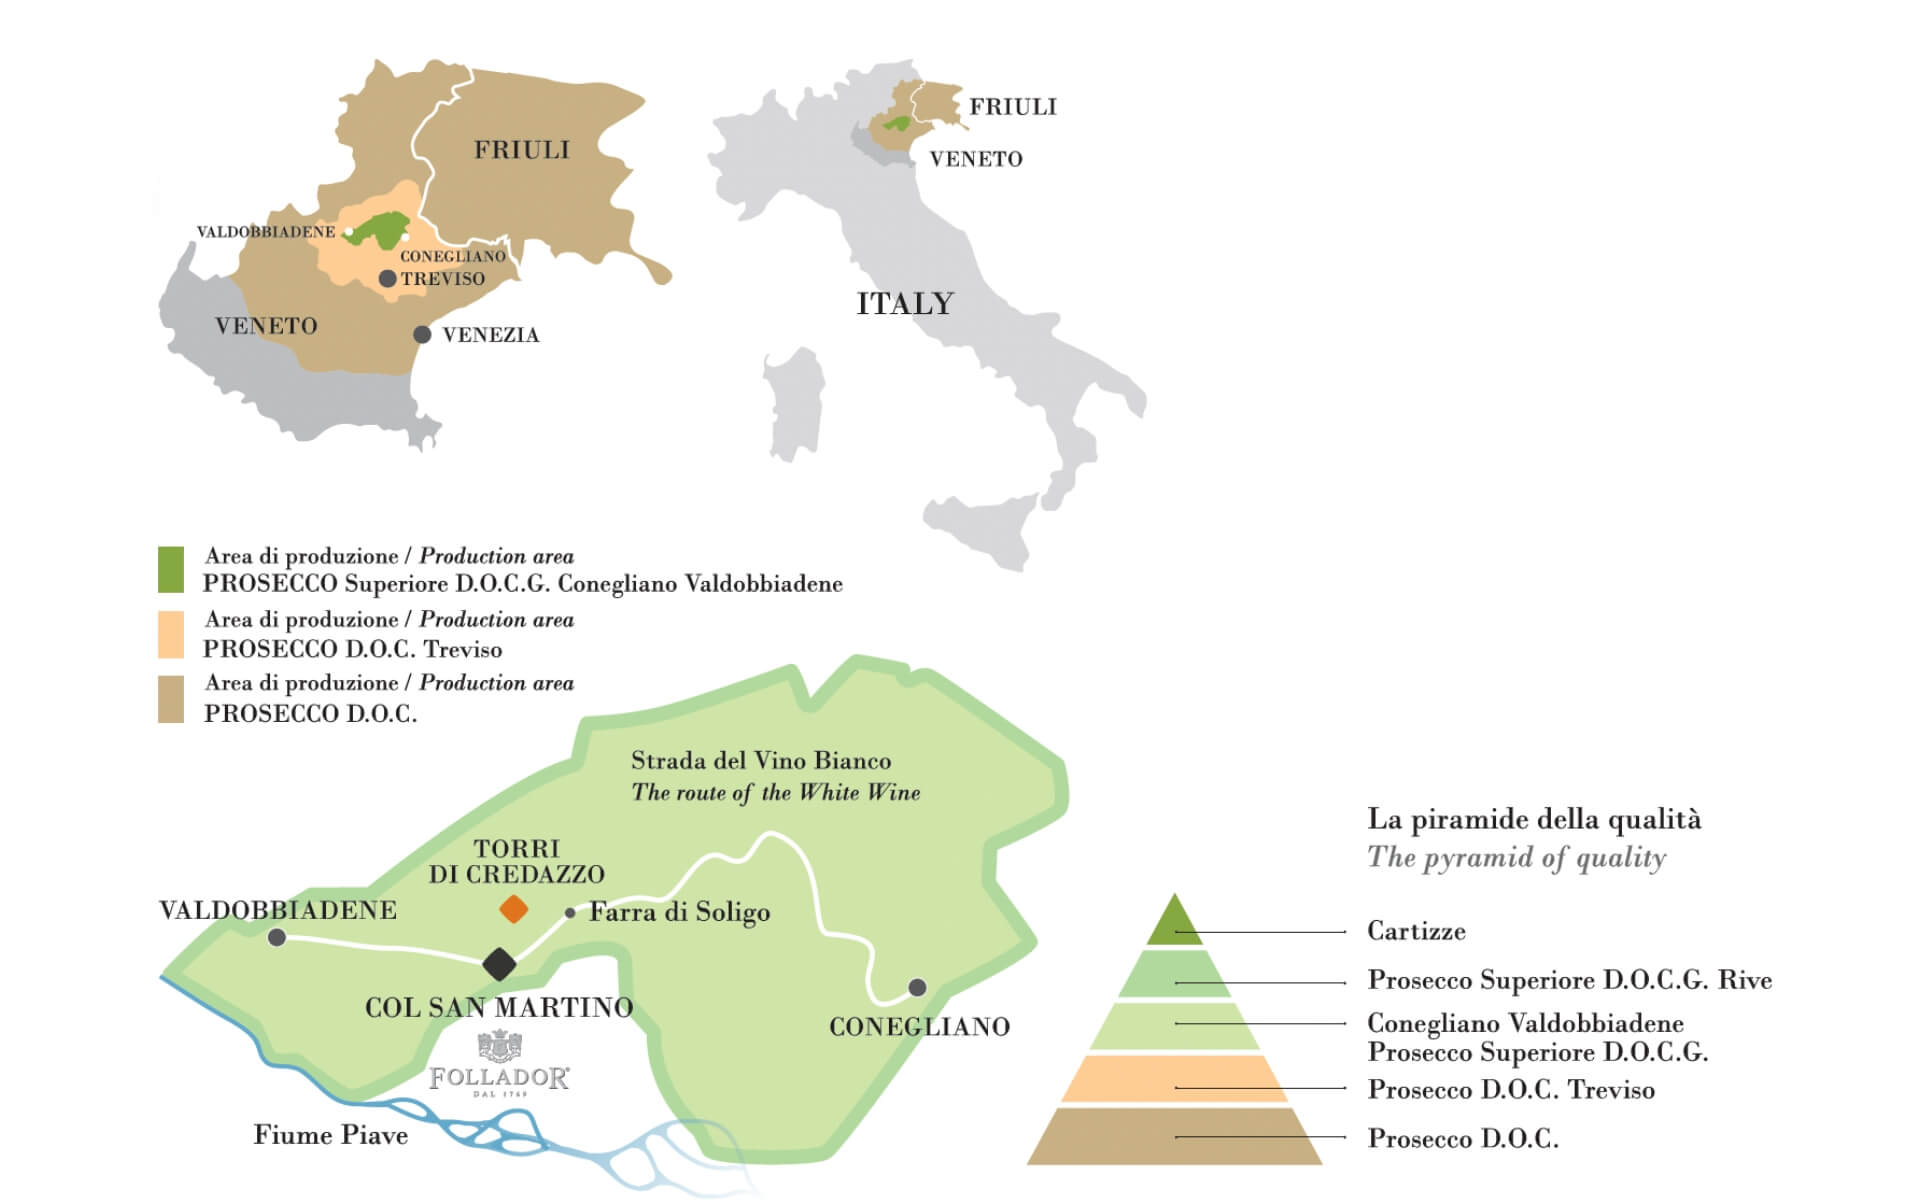 maps showing the prosecco regions